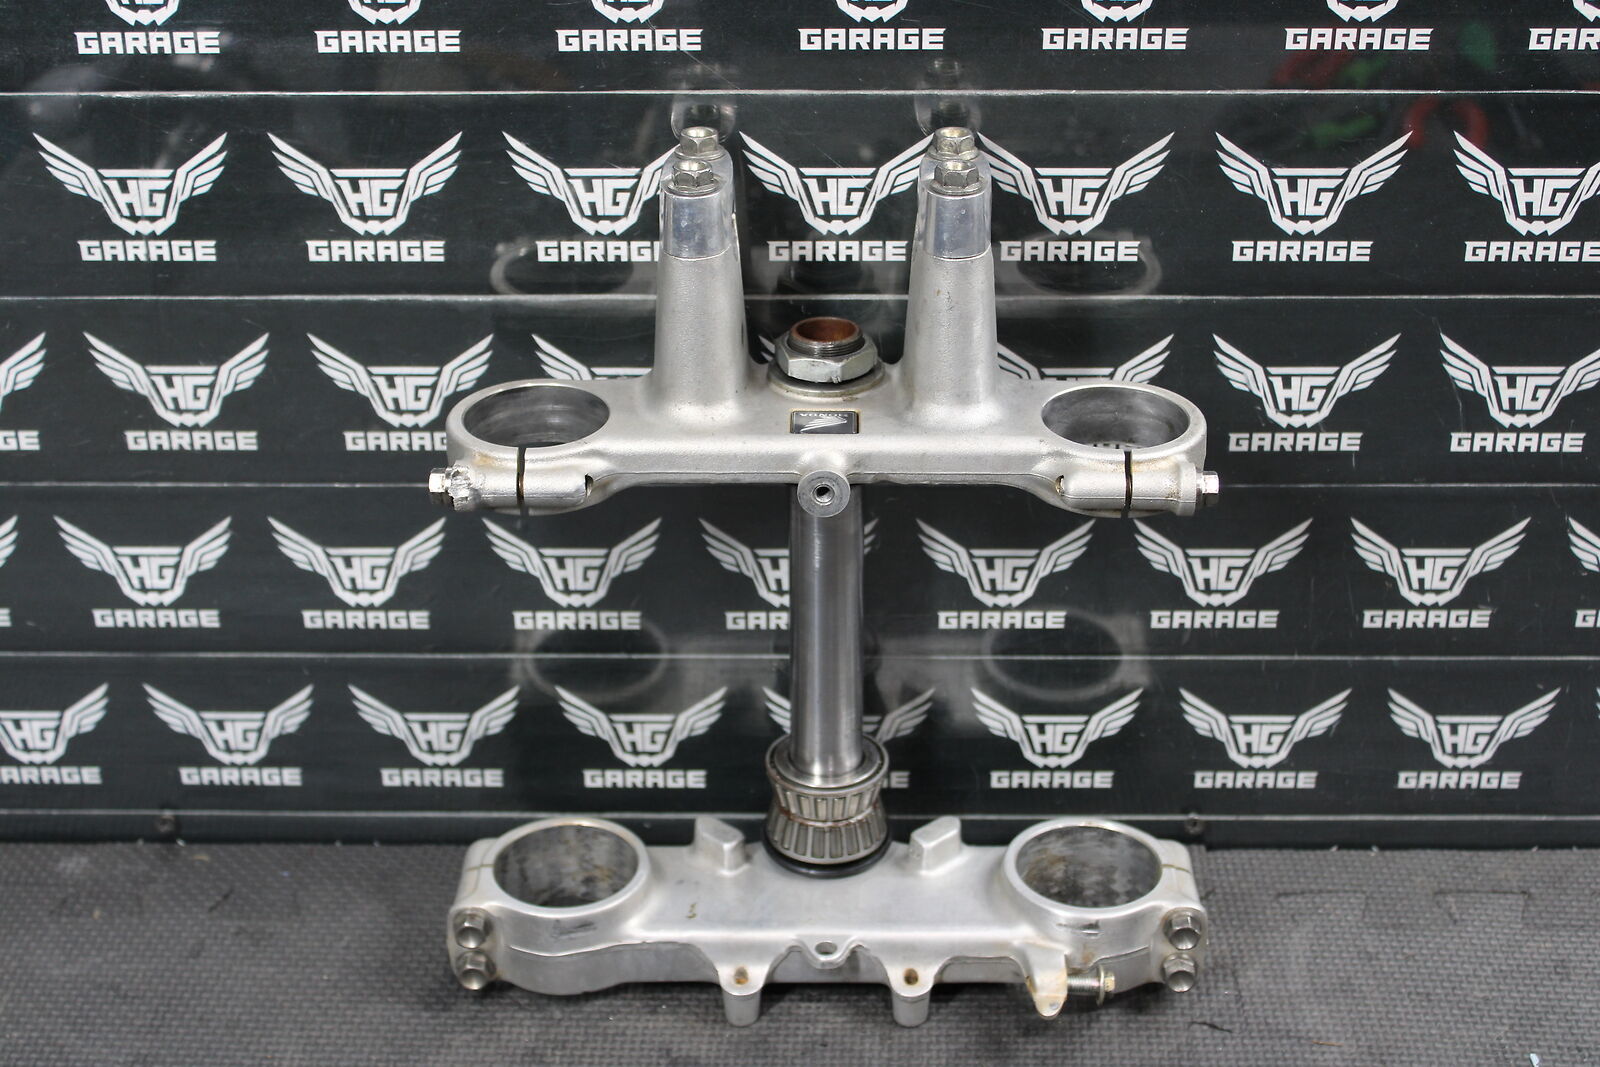 2008 HONDA CRF150RB CRF150R EXPERT OEM FRONT FORKS LOWER TRIPLE TREE CLAMPS